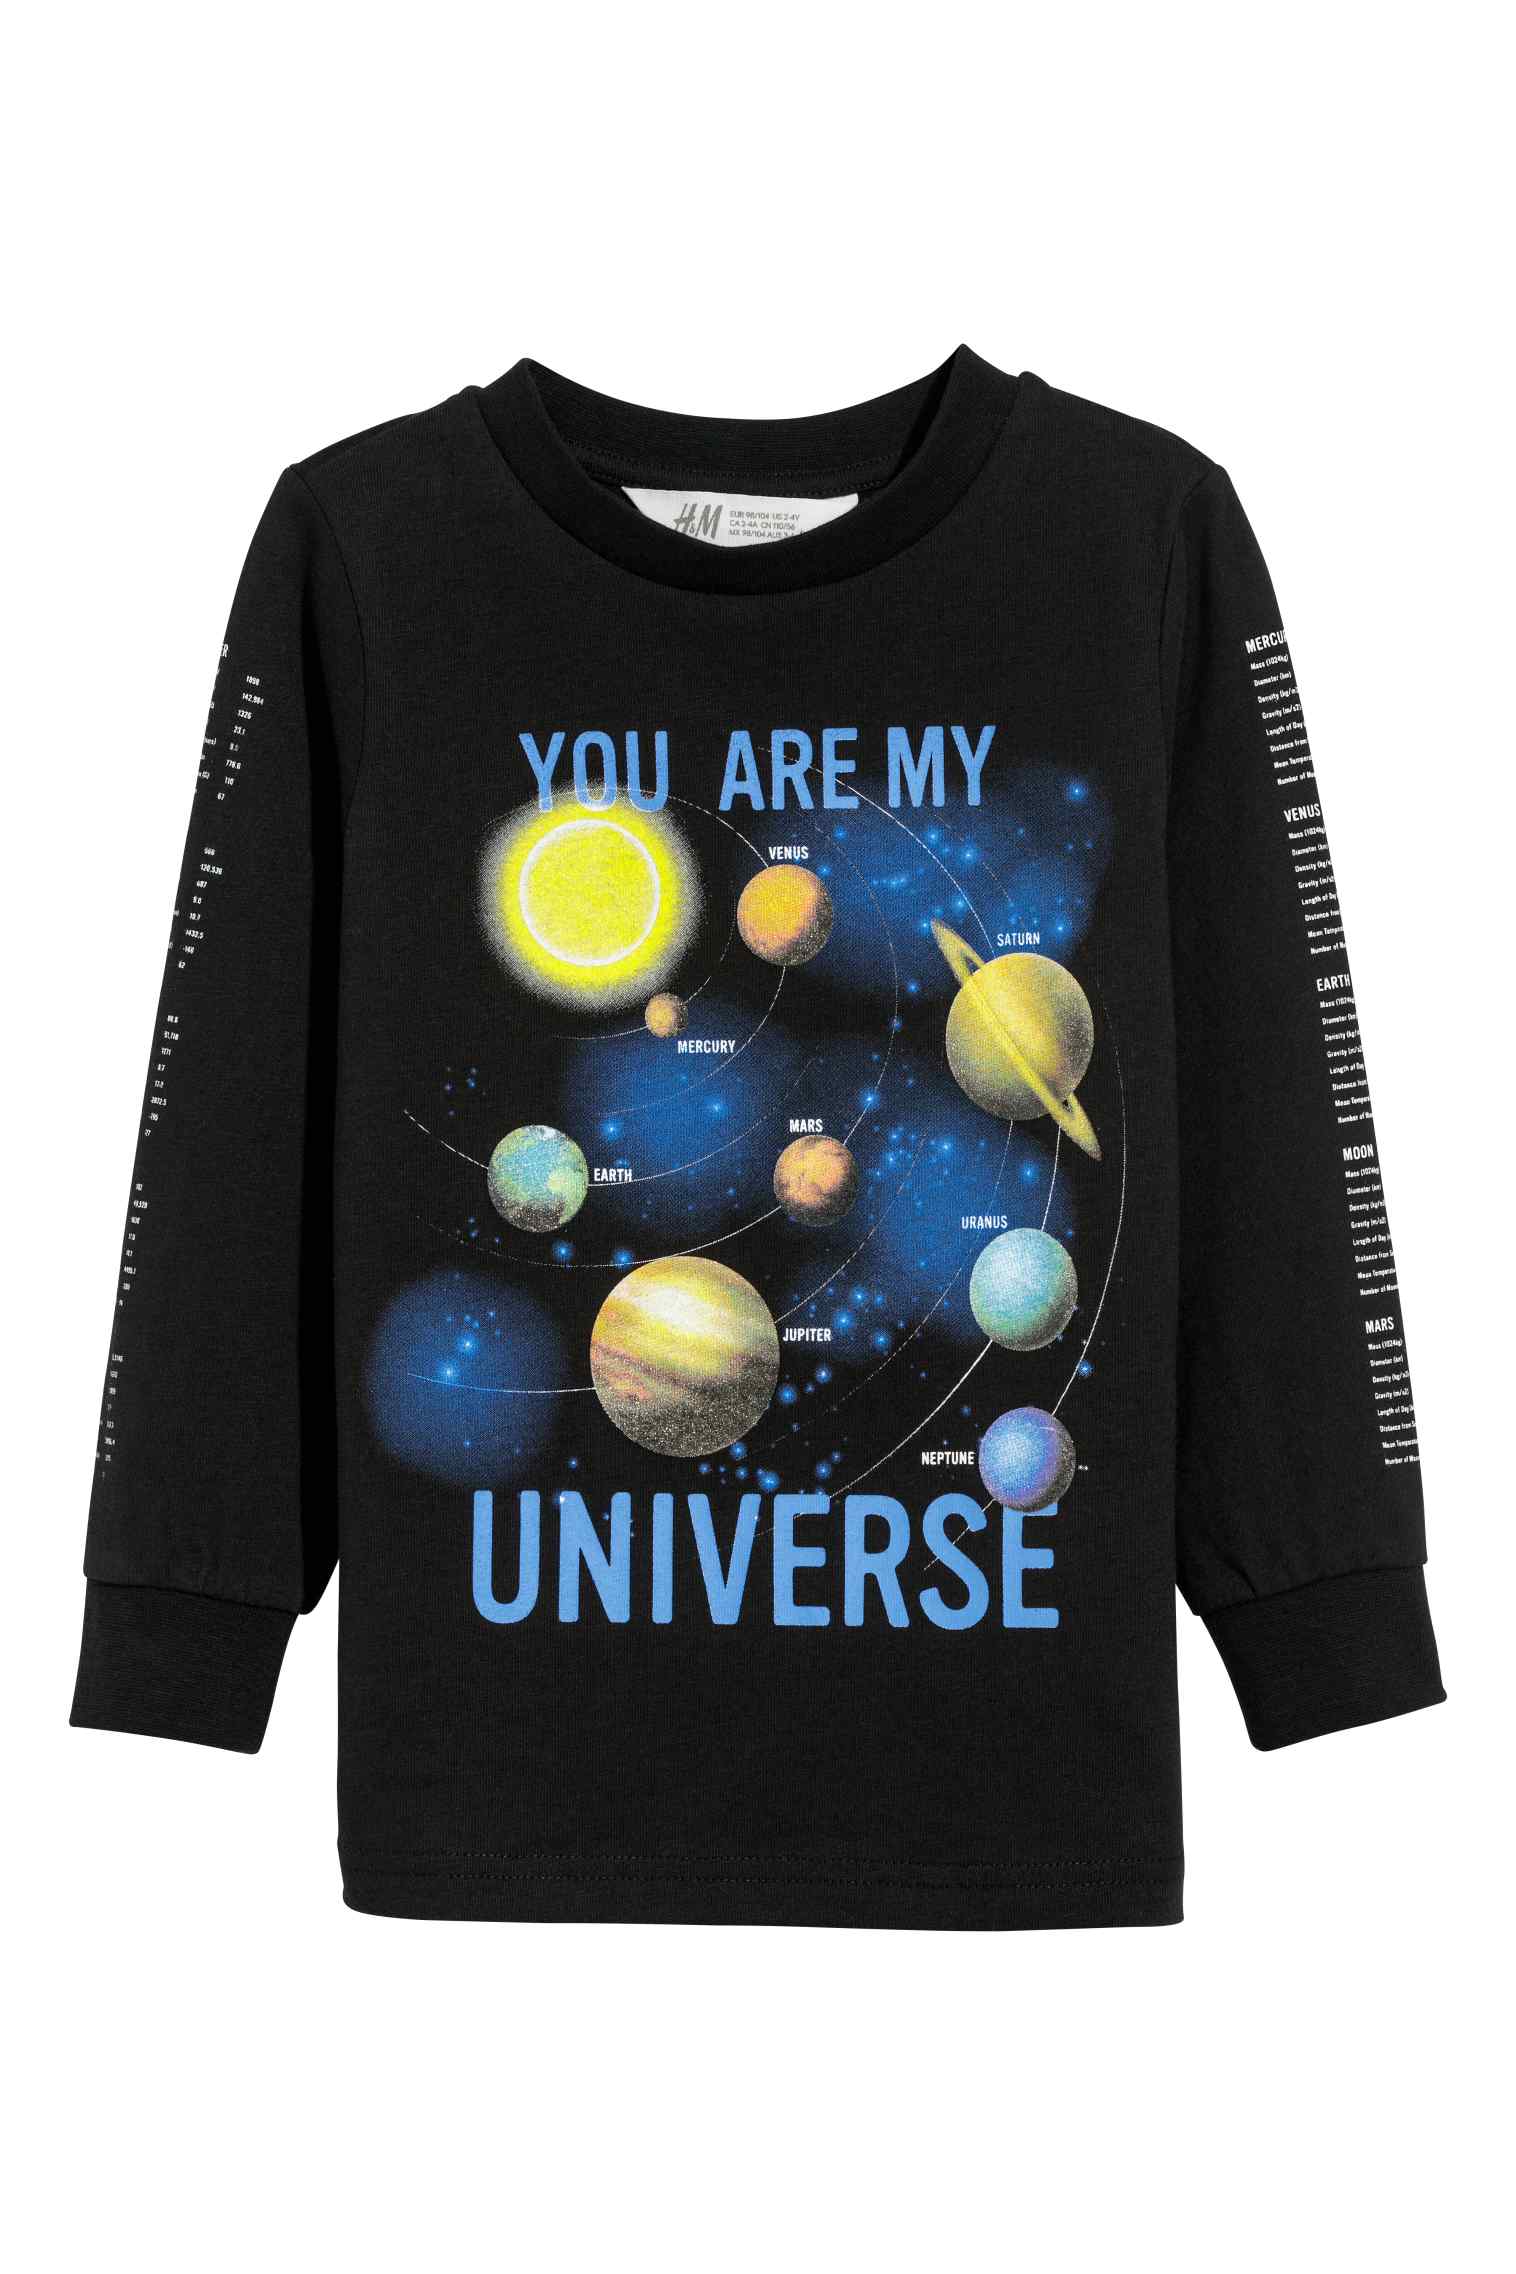 space t shirt